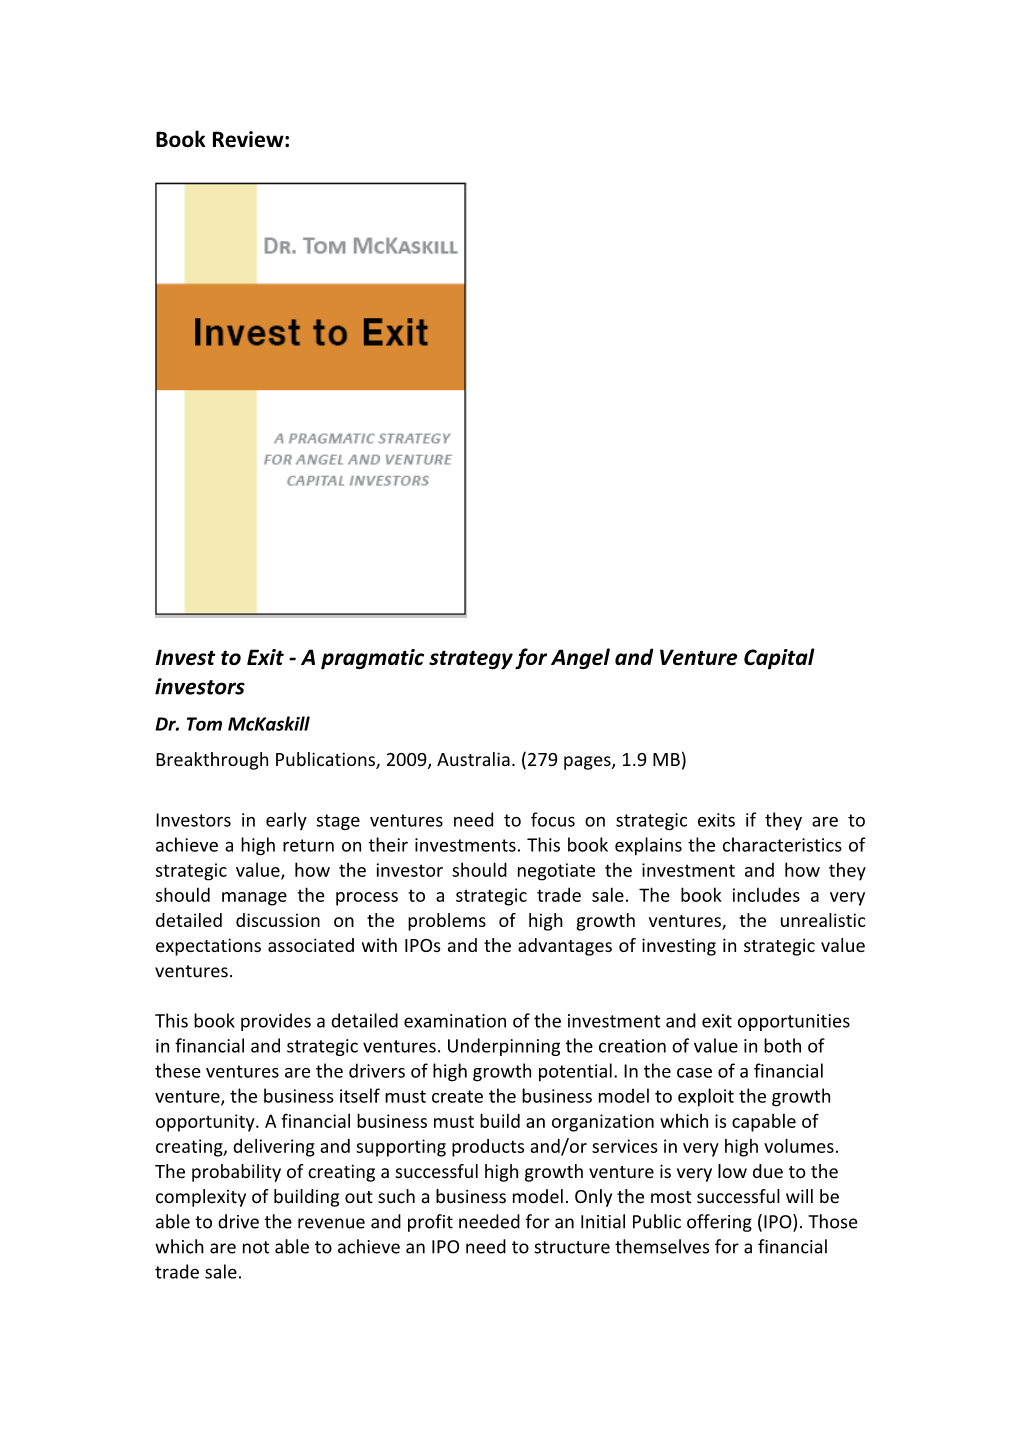 Invest to Exit - a Pragmatic Strategy for Angel and Venture Capital Investors